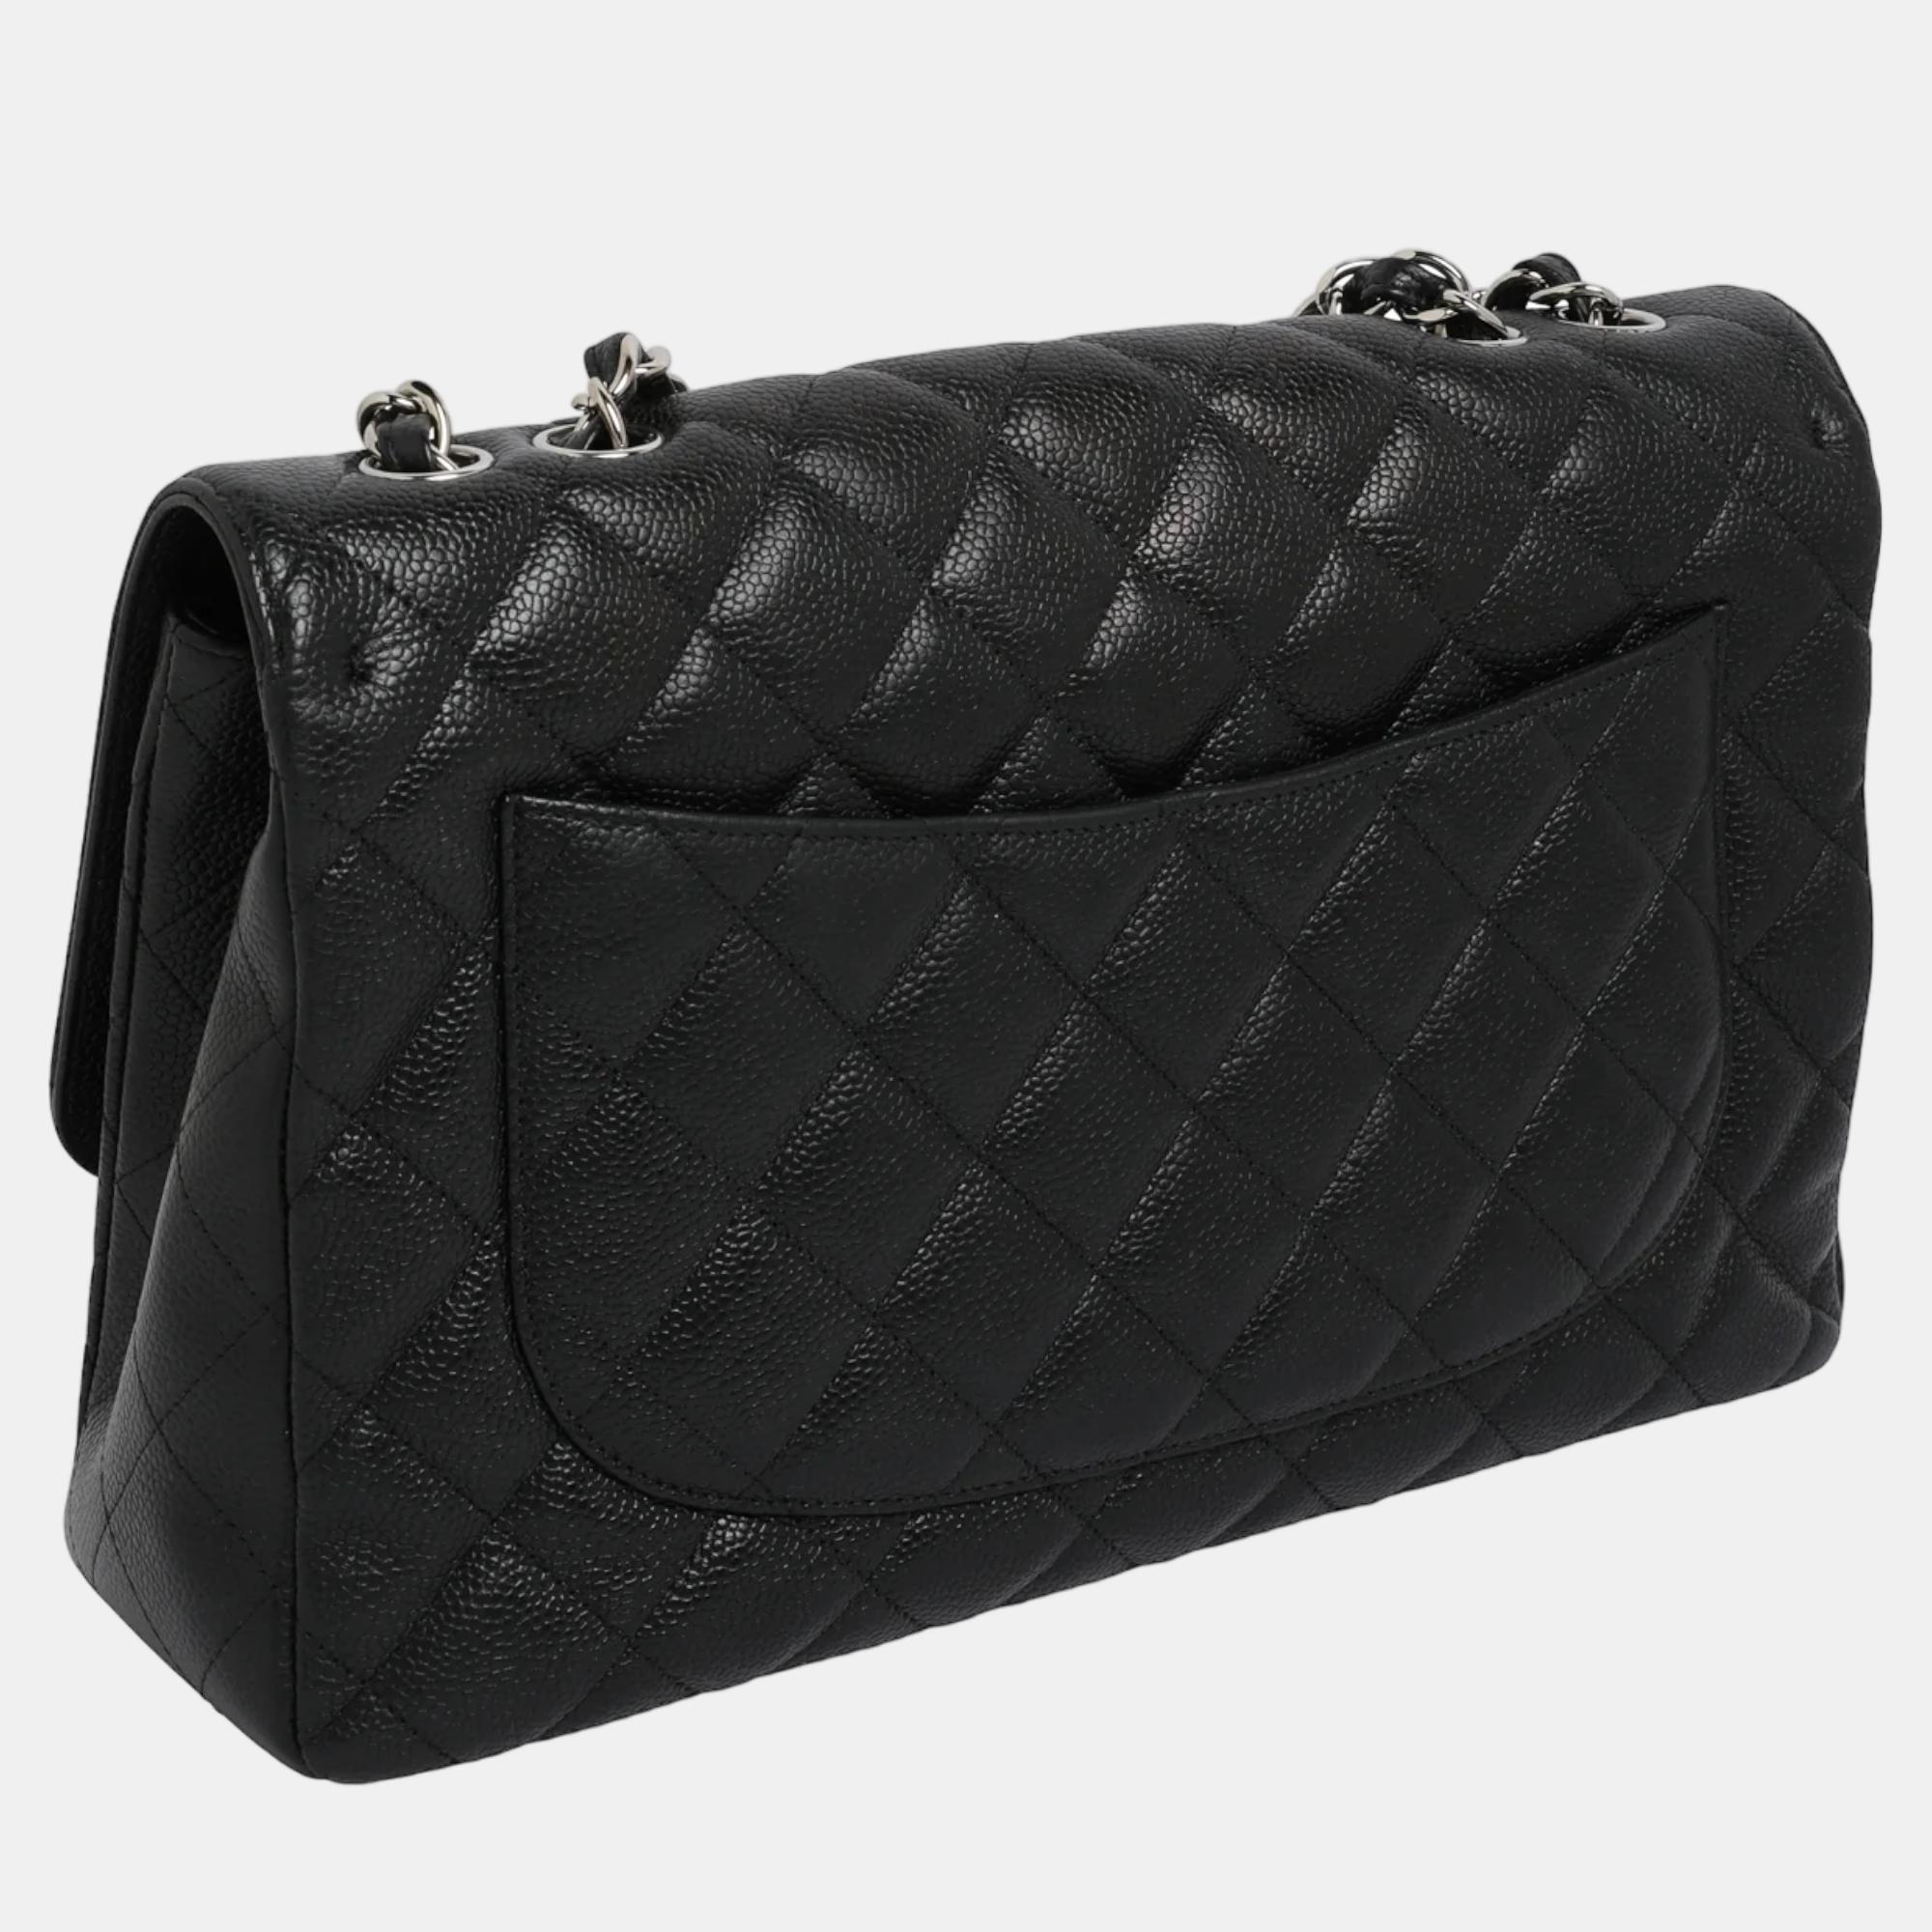 Chanel Black Caviar Quilted Maxi Single Flap Bag